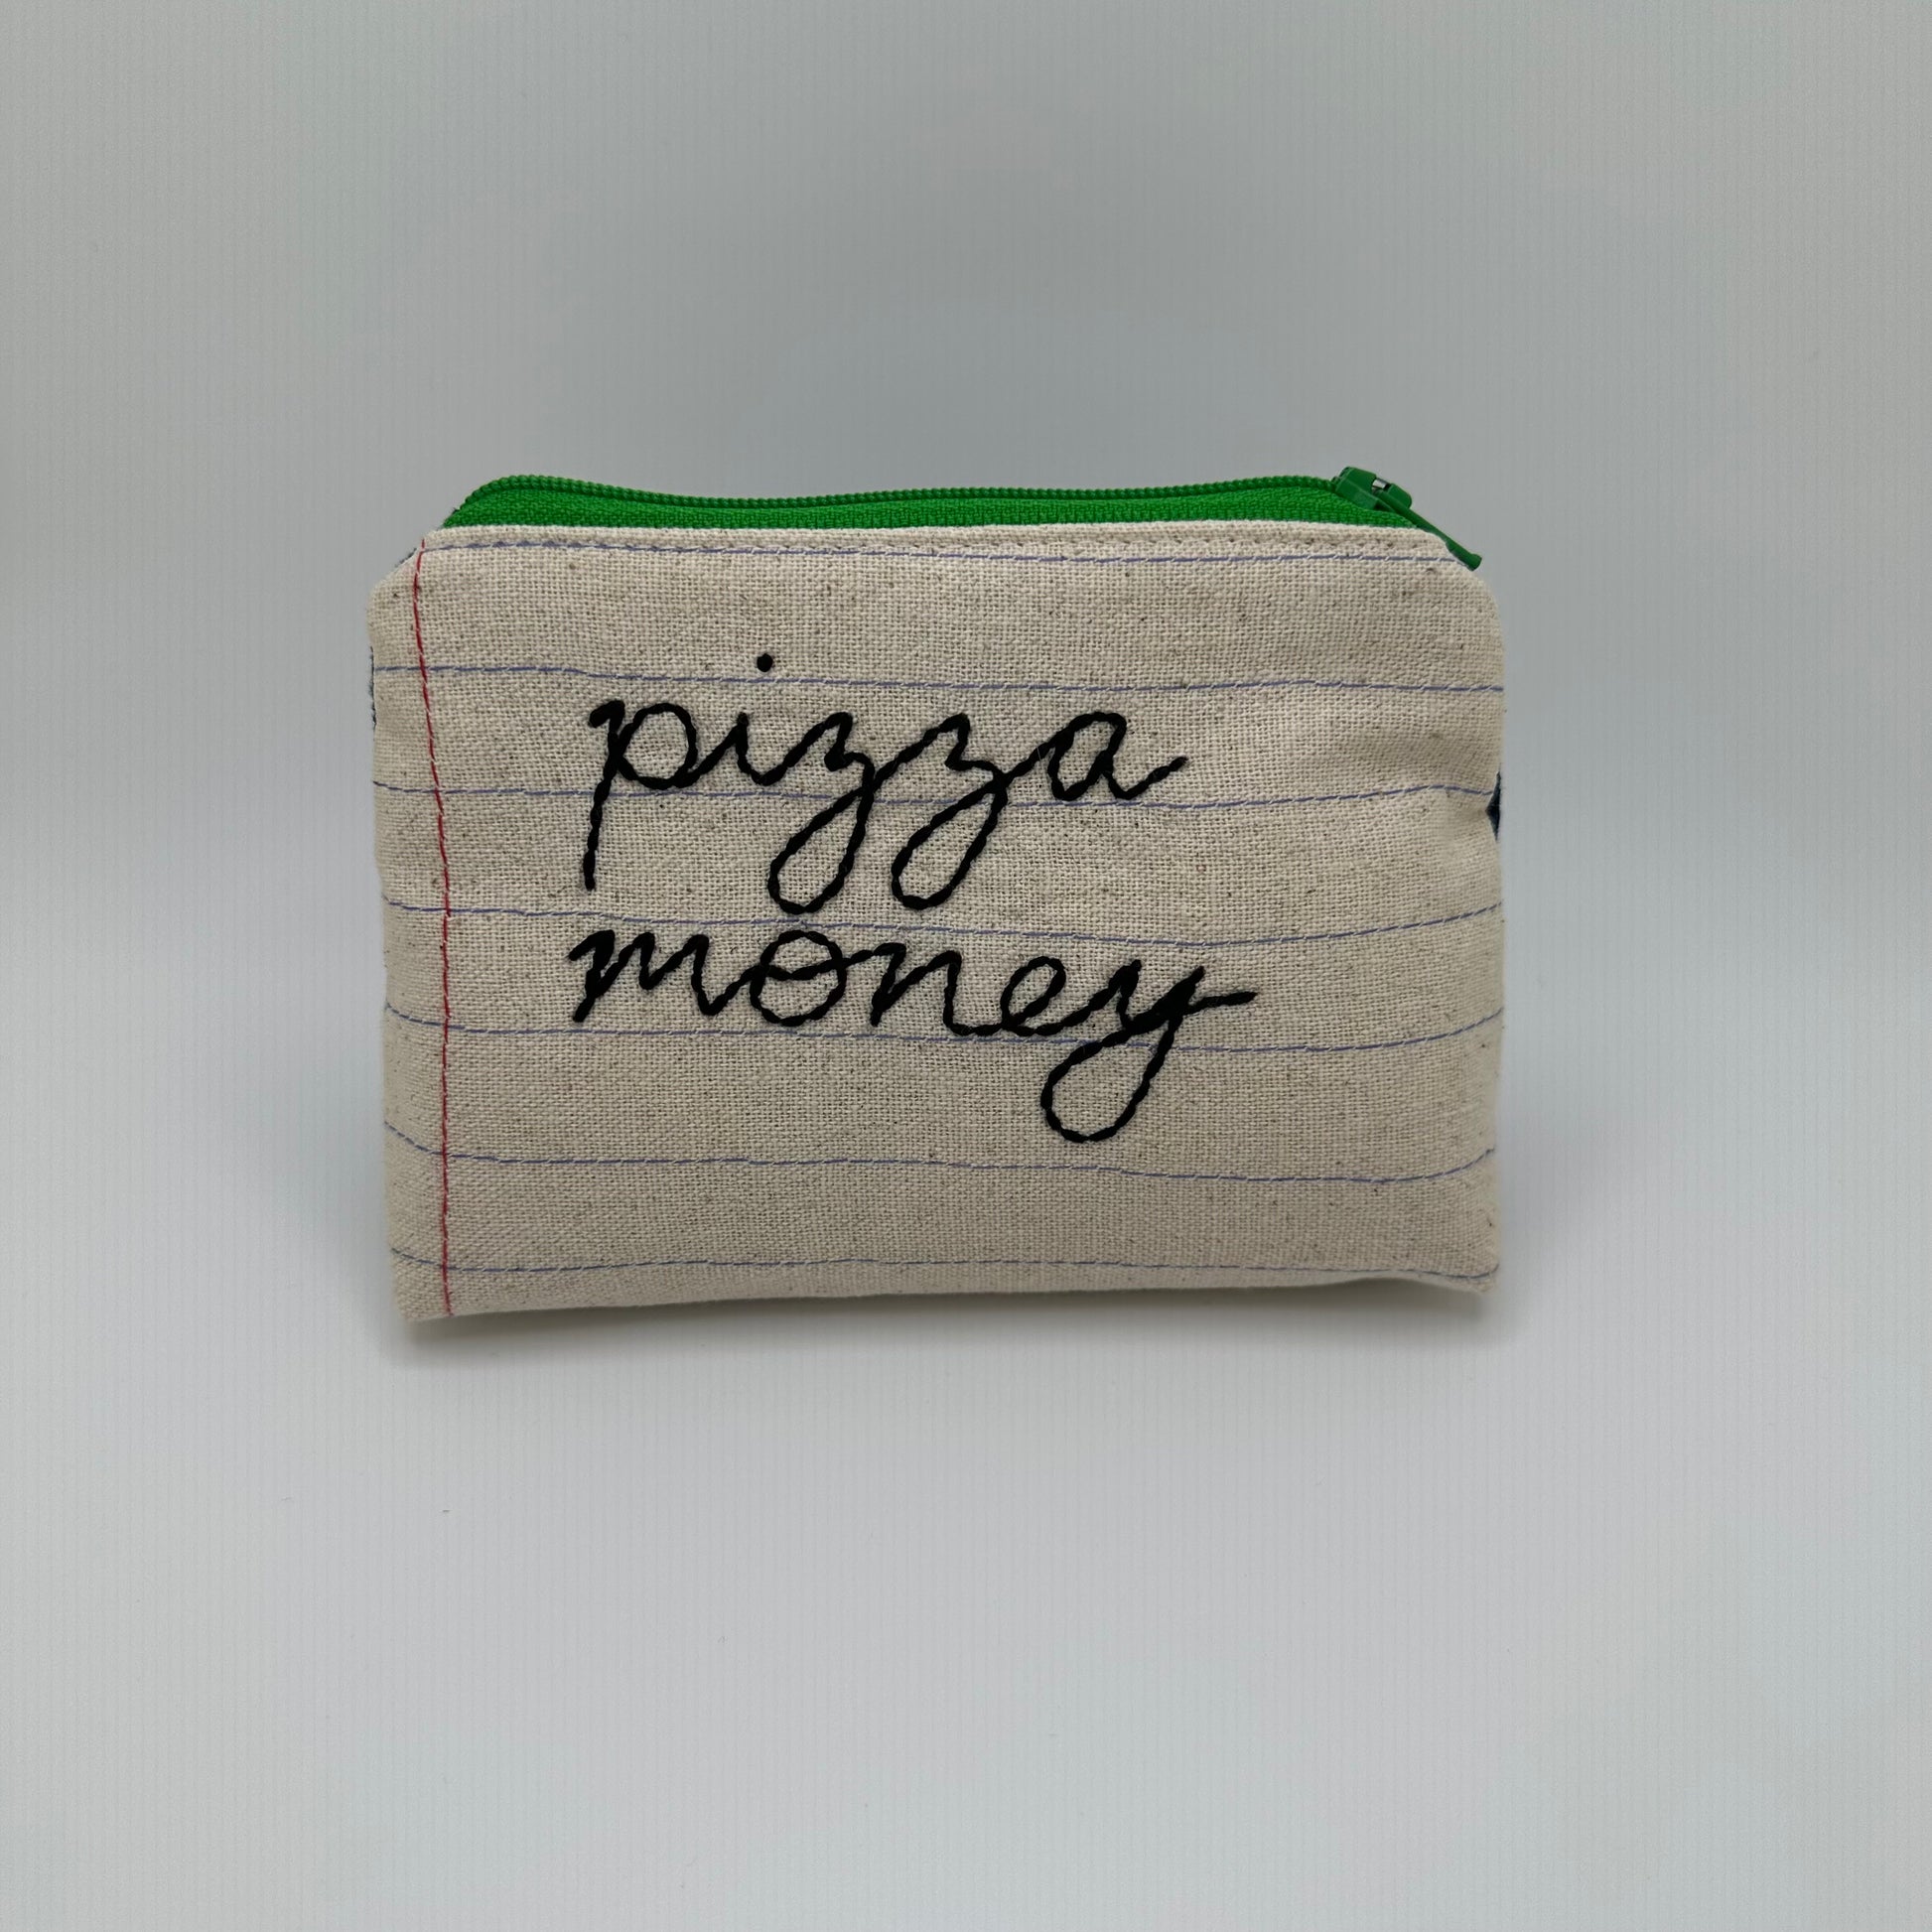 Handmade pouch sewn with the words "pizza money"